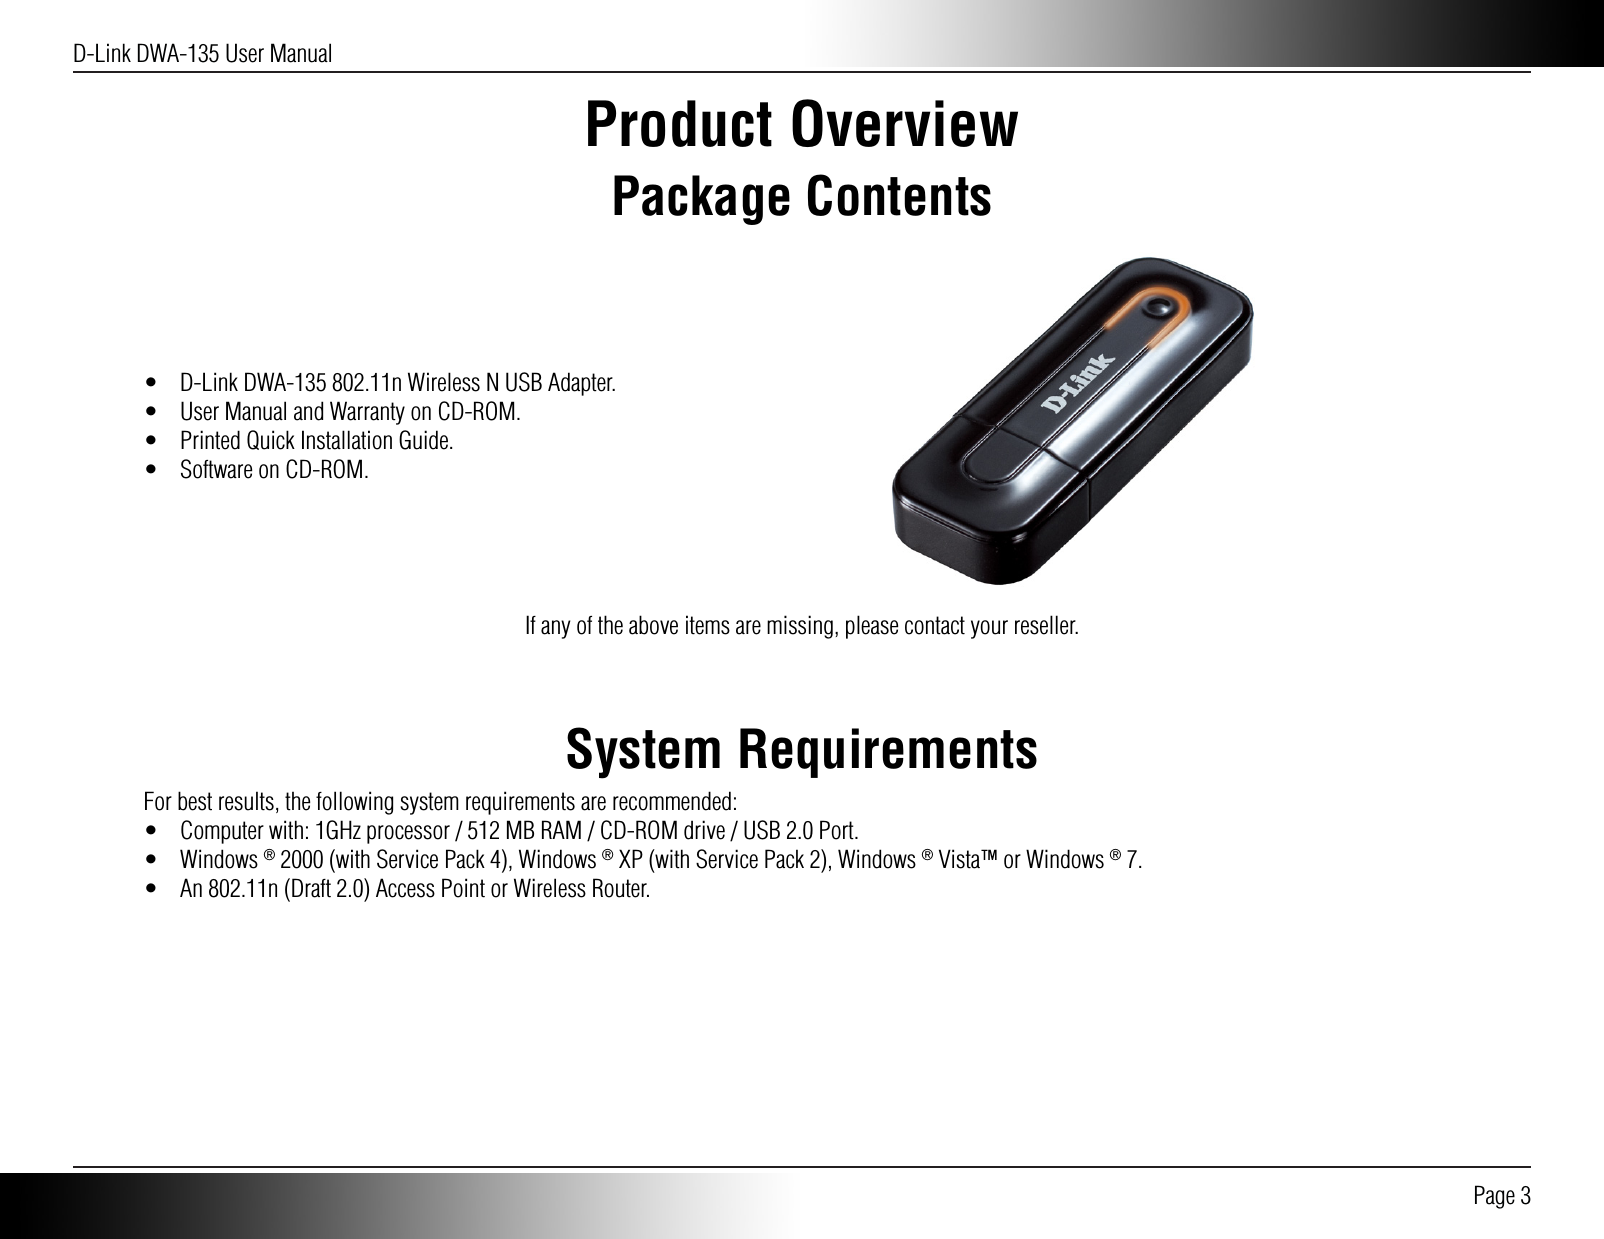 D-Link DWA-135 User Manual Page 3Product OverviewPackage Contents•  D-Link DWA-135 802.11n Wireless N USB Adapter.•  User Manual and Warranty on CD-ROM.•  Printed Quick Installation Guide.•  Software on CD-ROM.If any of the above items are missing, please contact your reseller.System RequirementsFor best results, the following system requirements are recommended:•  Computer with: 1GHz processor / 512 MB RAM / CD-ROM drive / USB 2.0 Port.• Windows ® 2000 (with Service Pack 4), Windows ® XP (with Service Pack 2), Windows ® Vista™ or Windows ® 7.•  An 802.11n (Draft 2.0) Access Point or Wireless Router.